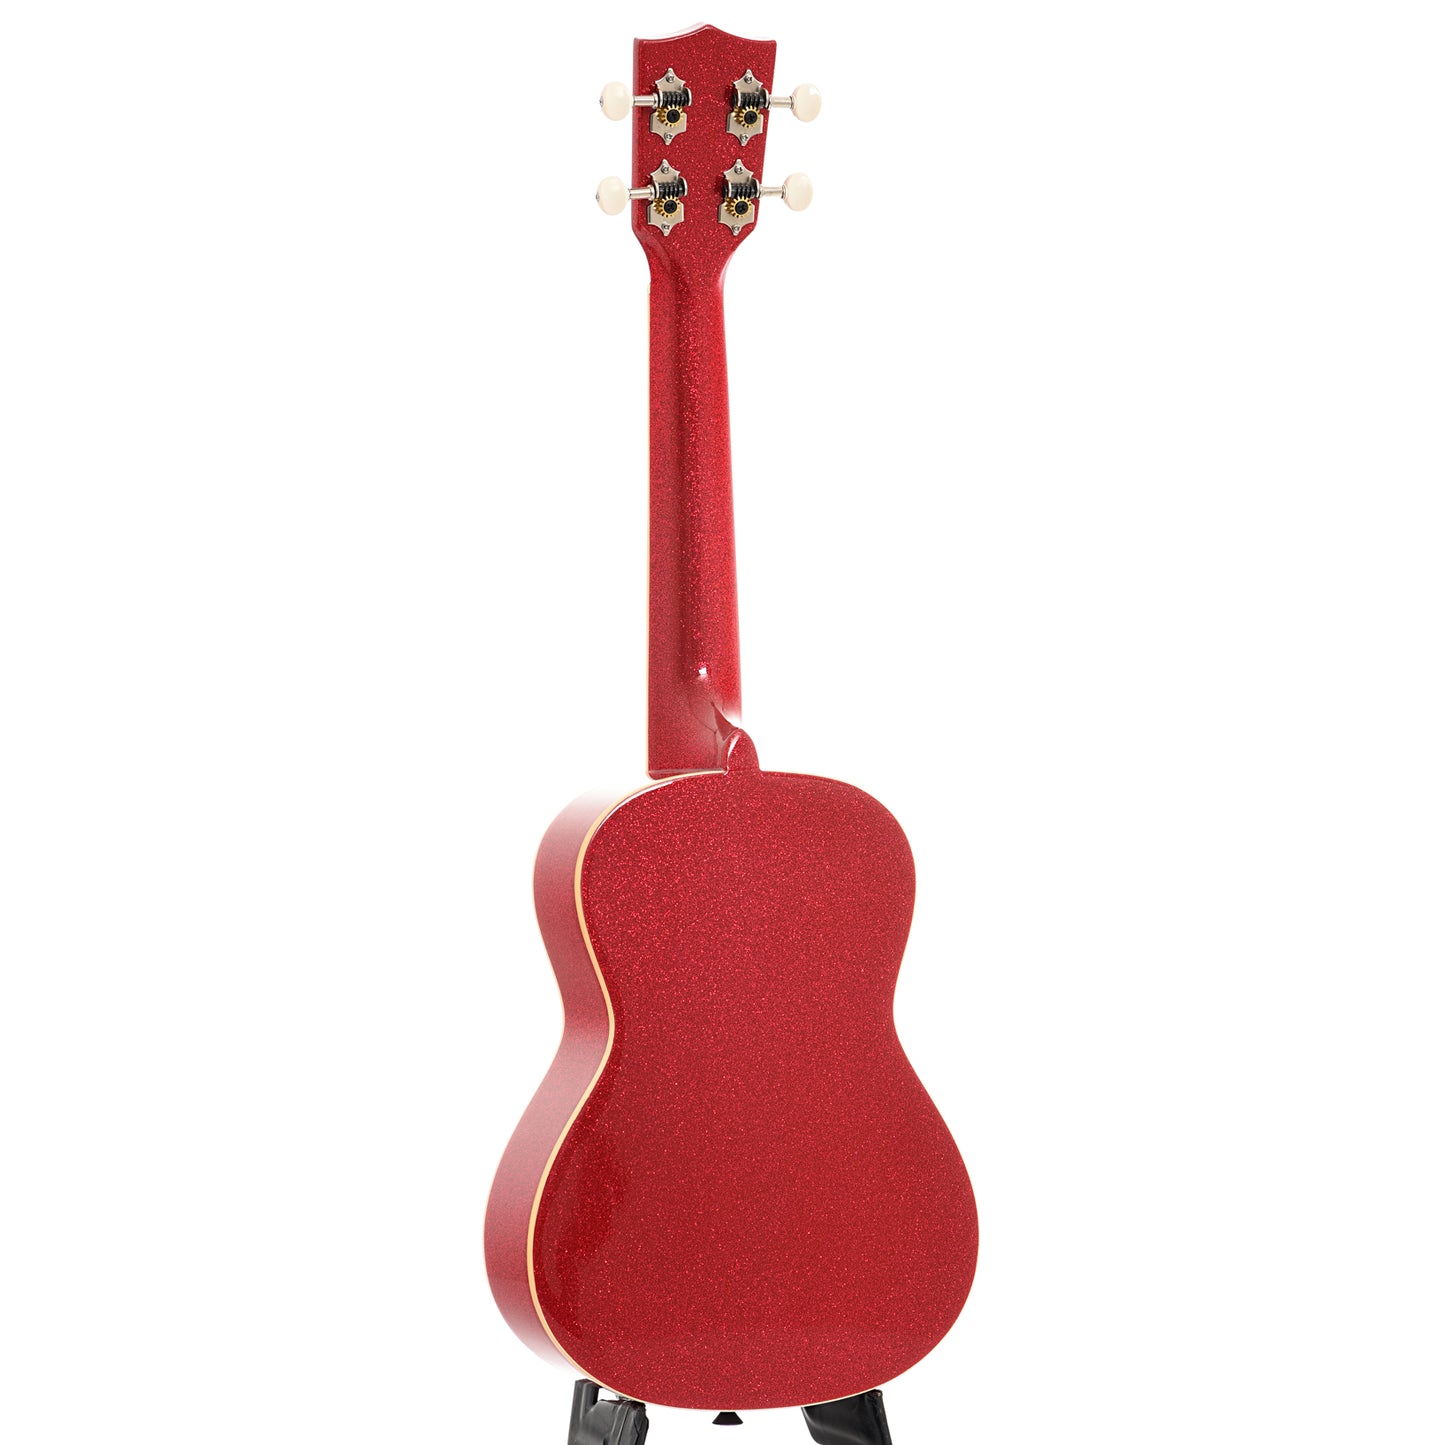 Full back and side of Kala Gloss Sparkle Concert Ukulele, Ritzy Red (recent)